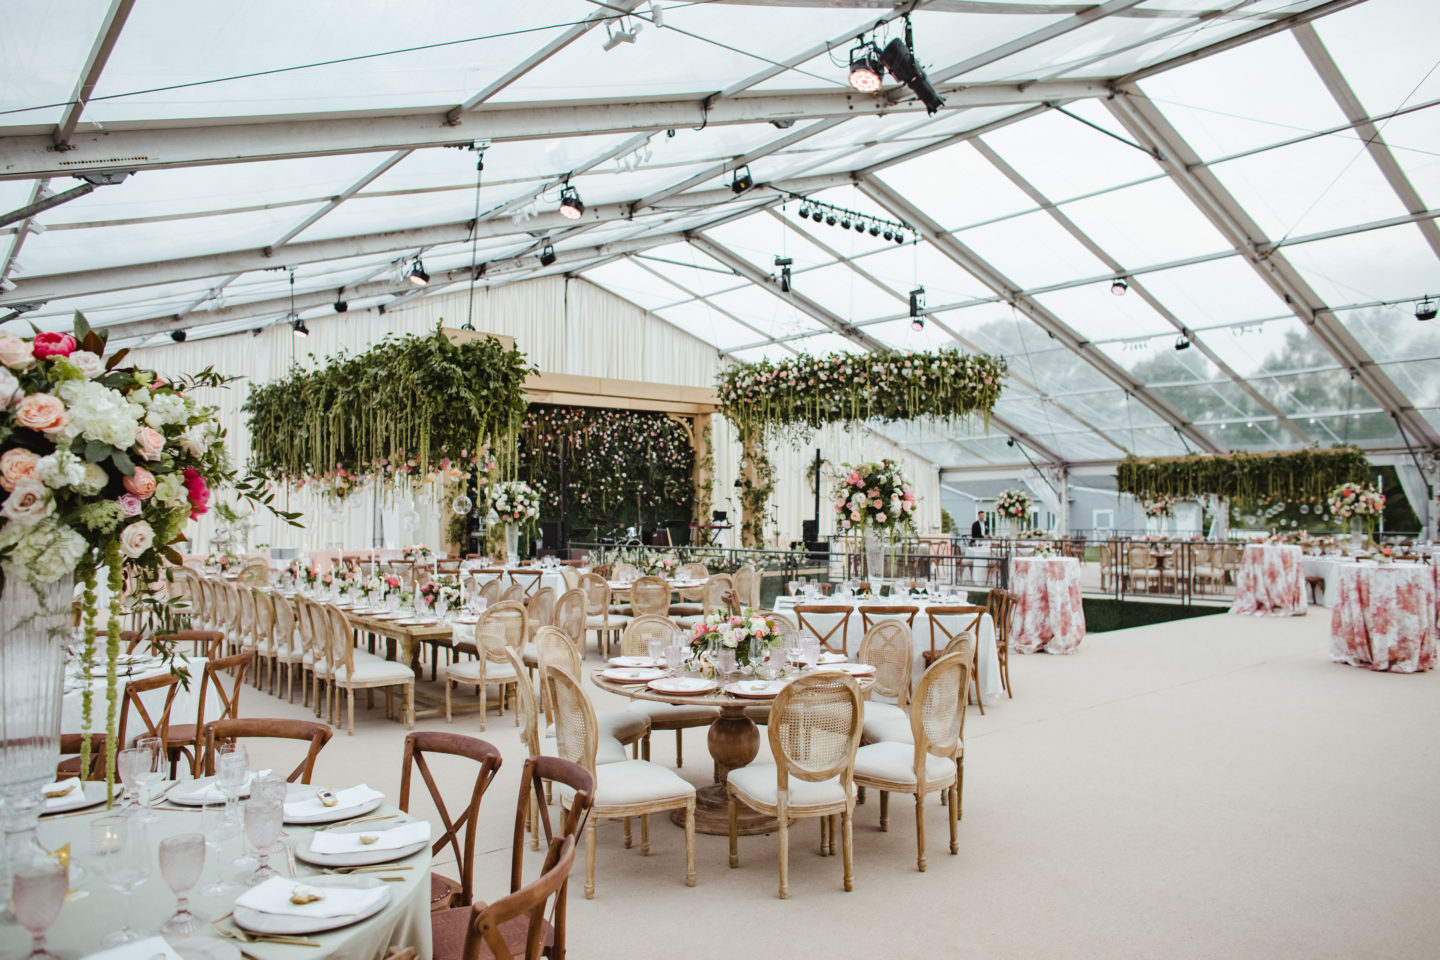 spring event rentals clear span structure wedding